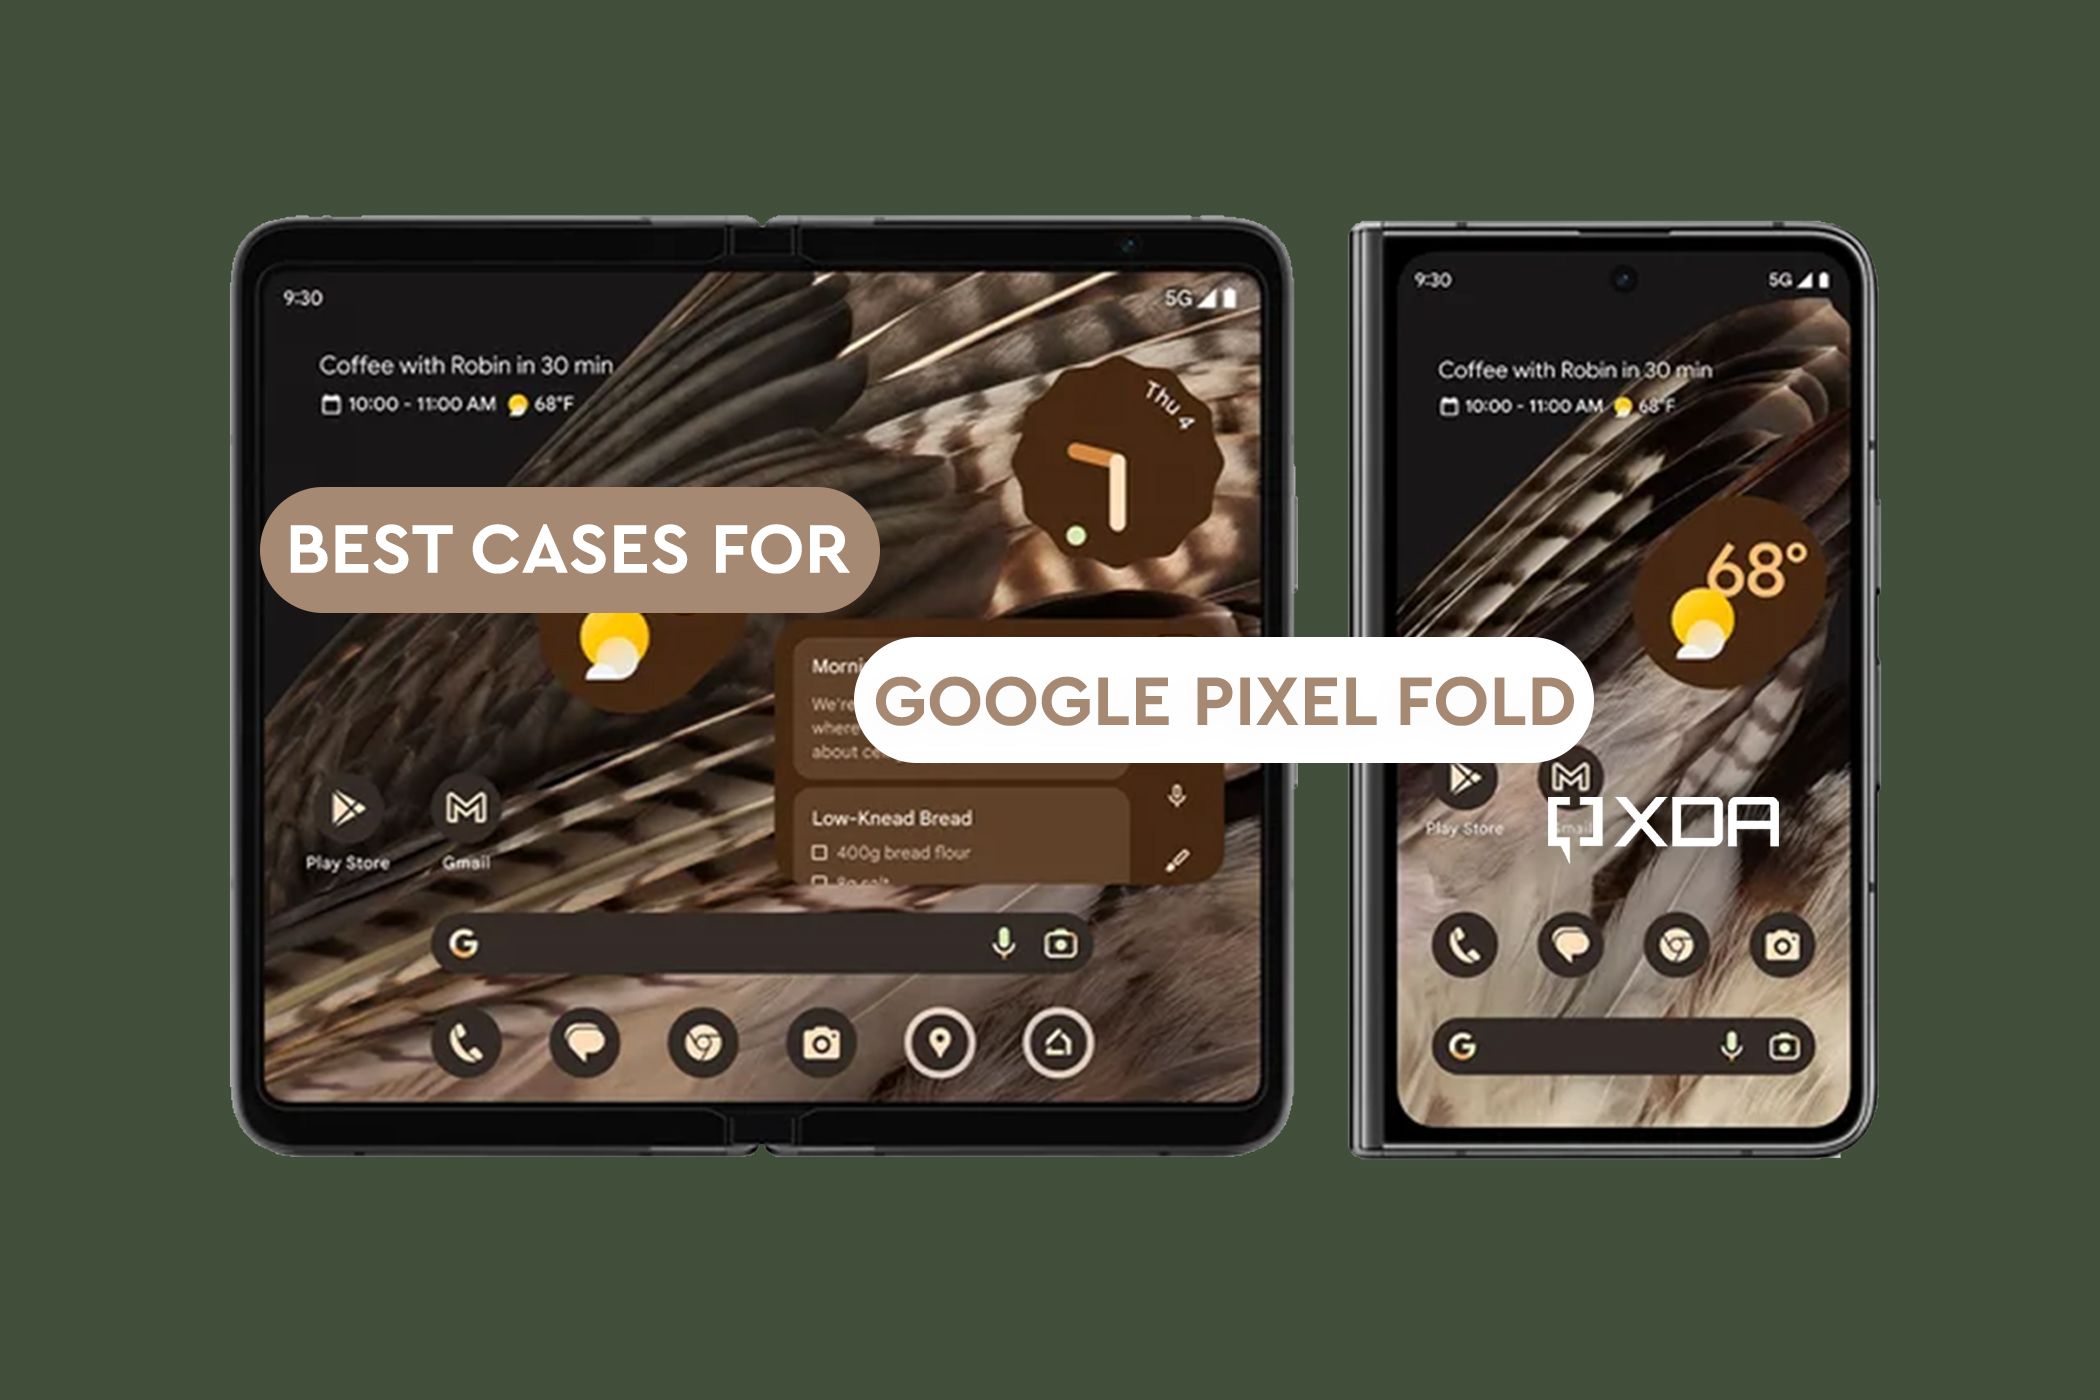 Google Pixel Fold on green background with Best Cases for Google Pixel Fold and XDA logo in the foreground.